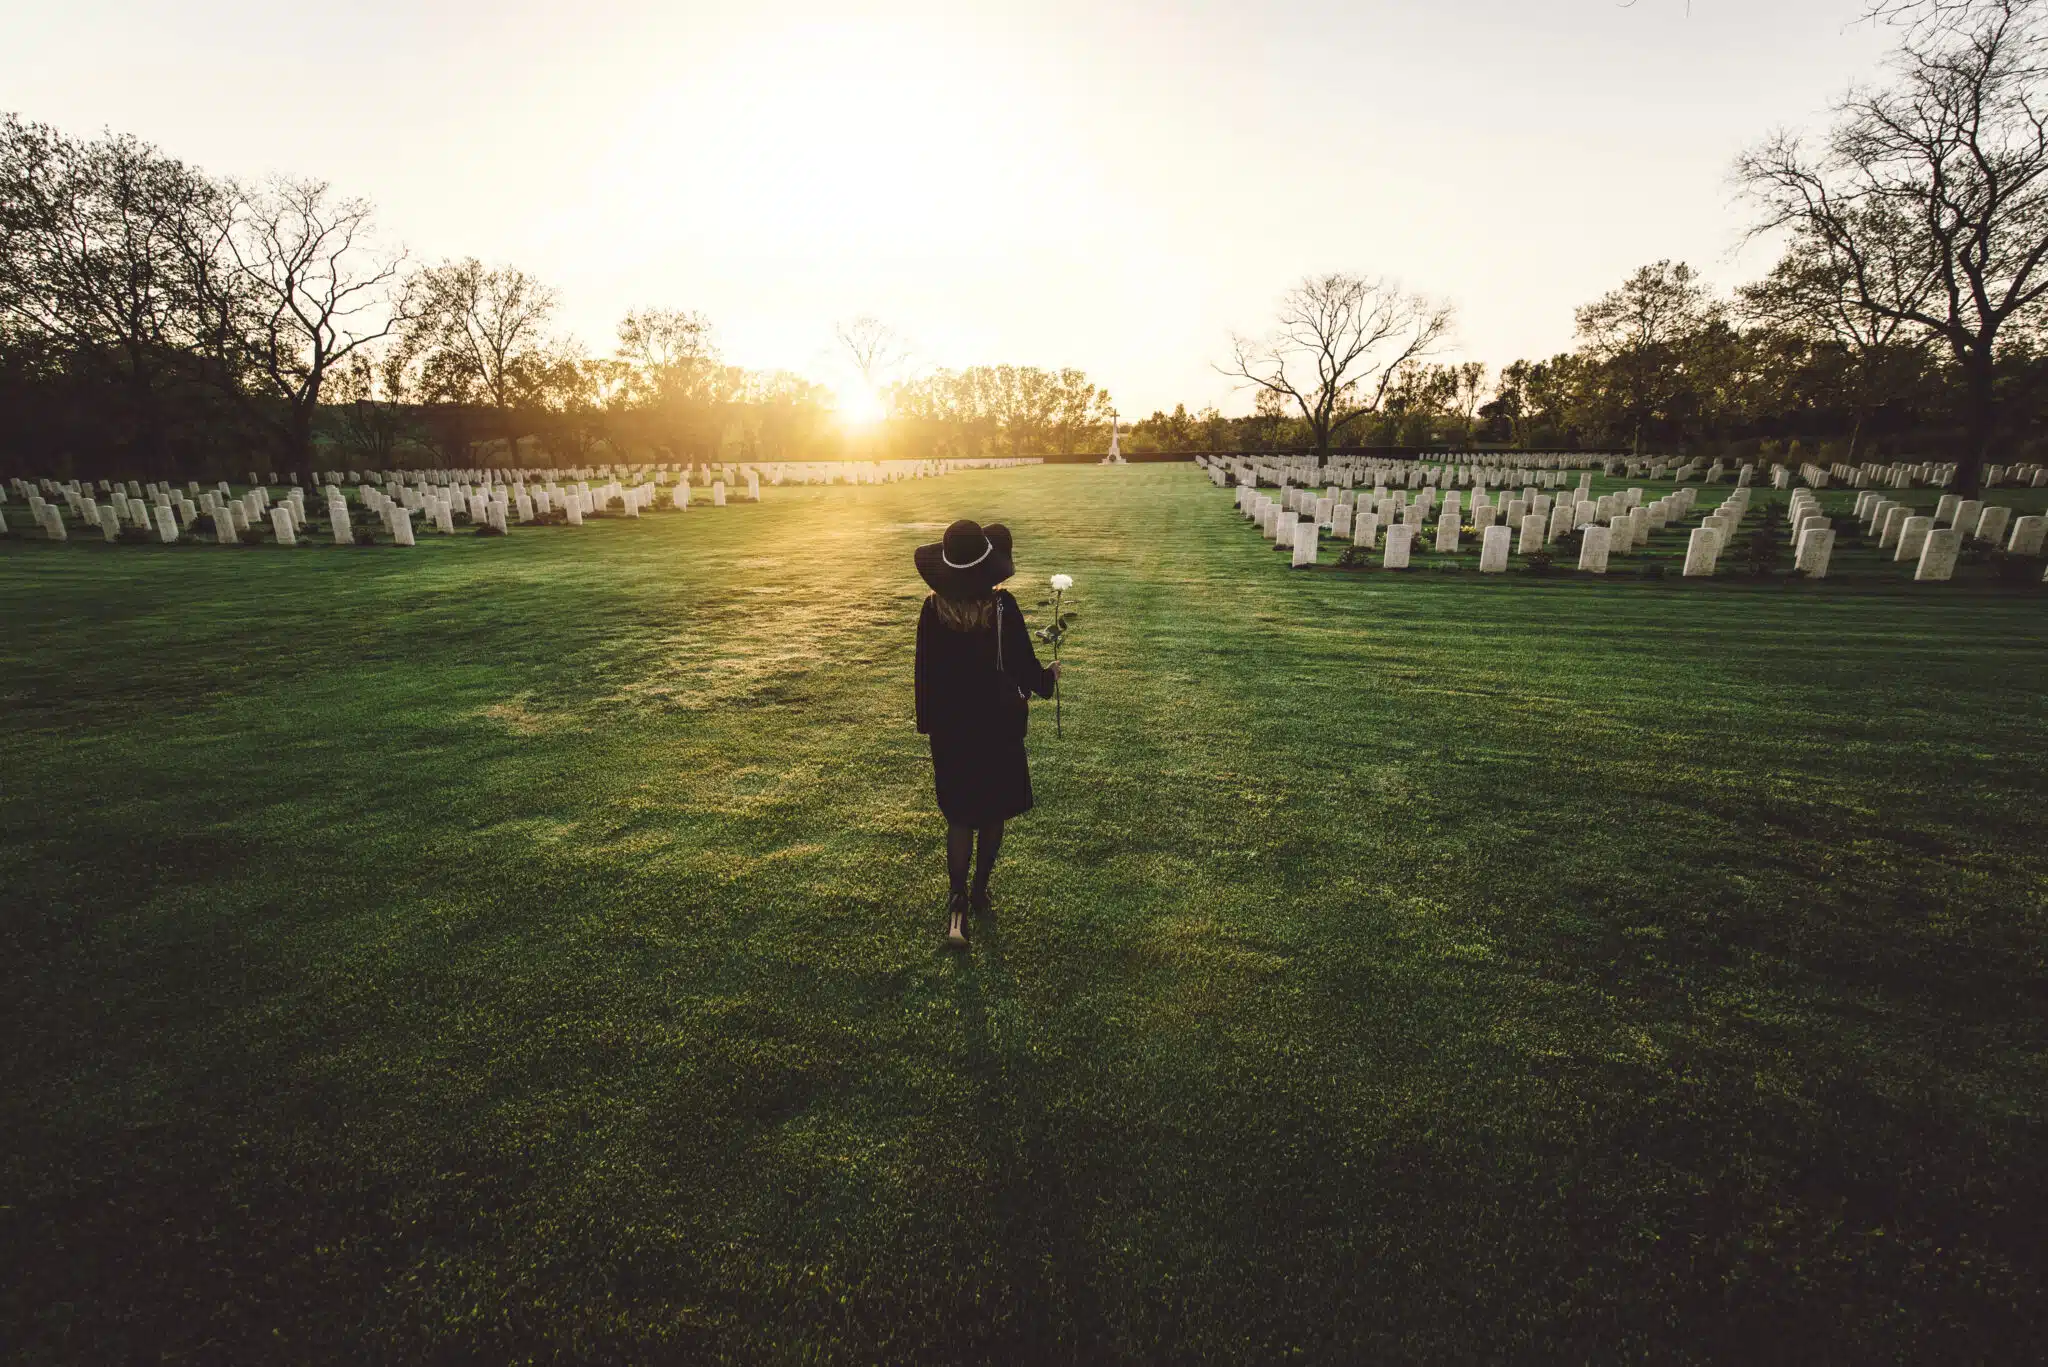 woman in black visiting cemetery grieving